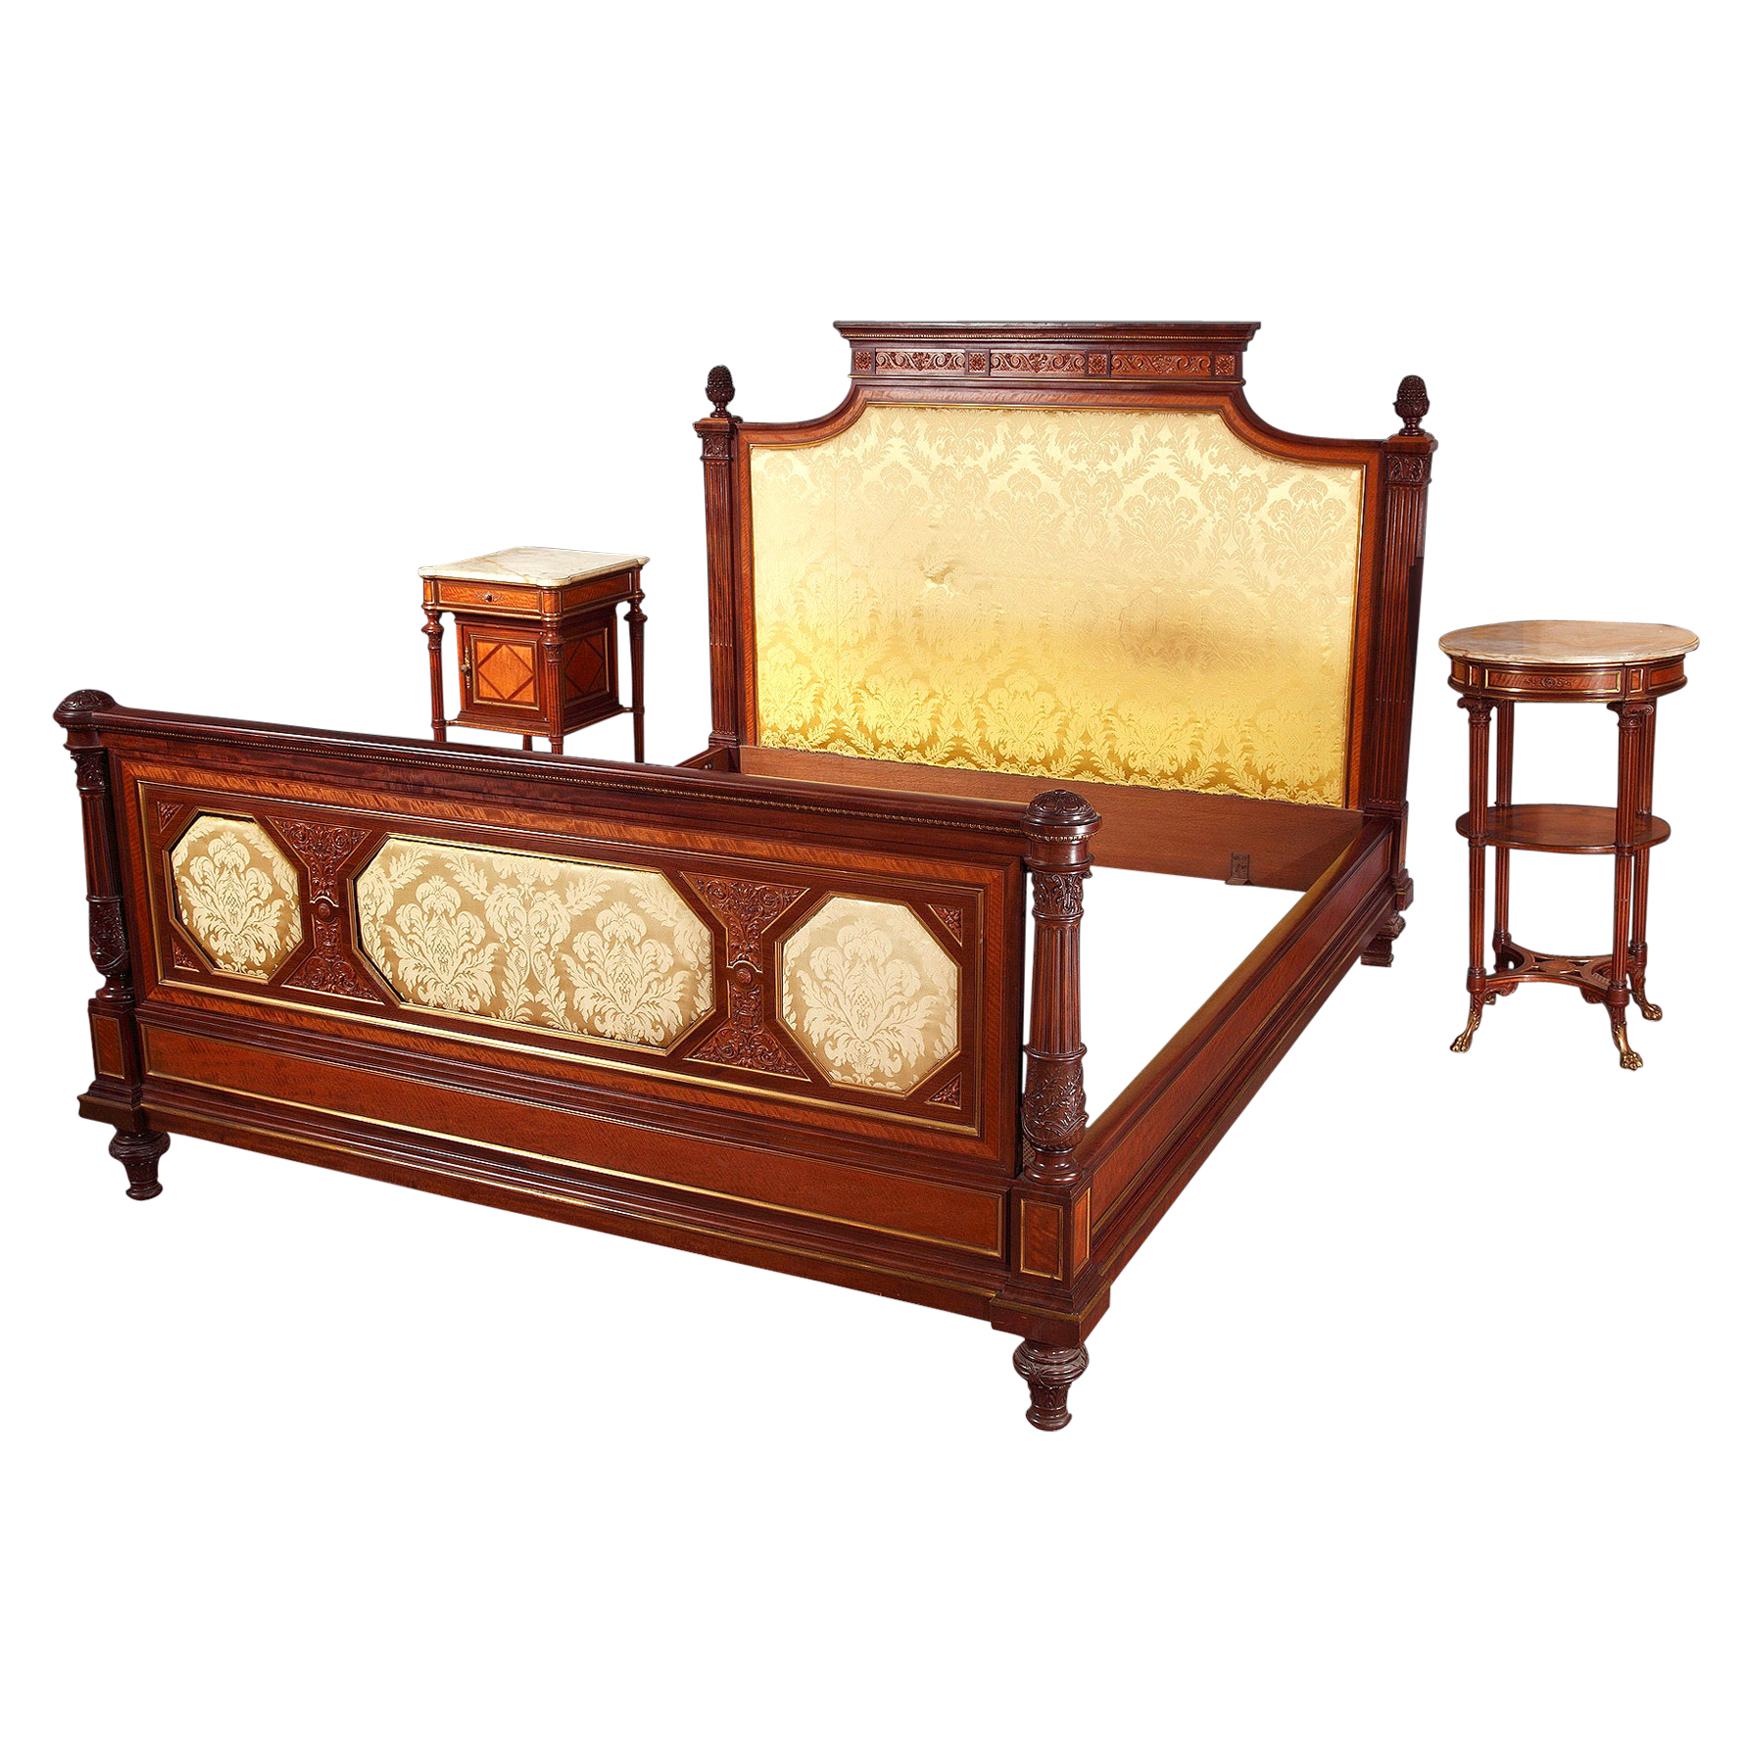 Exceptional 8 Pieces Bedroom Set by H.A. Fourdinois, France, Circa 1889